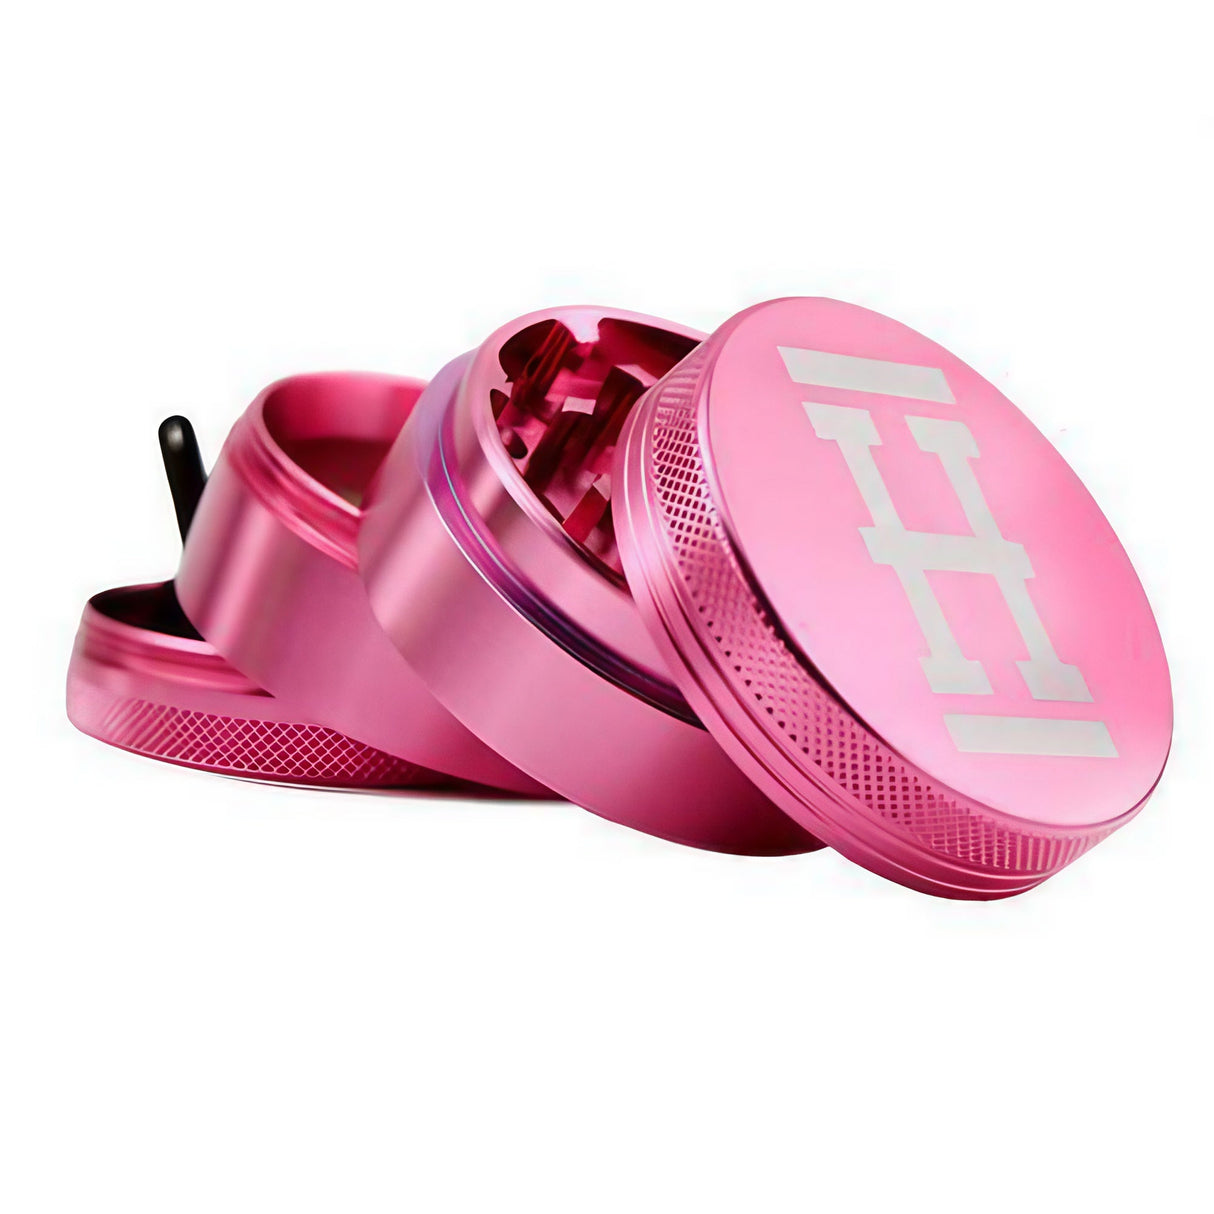 Hemper Travel Aluminum Grinder in Pink, 4-Piece Small Size, Angled View on White Background